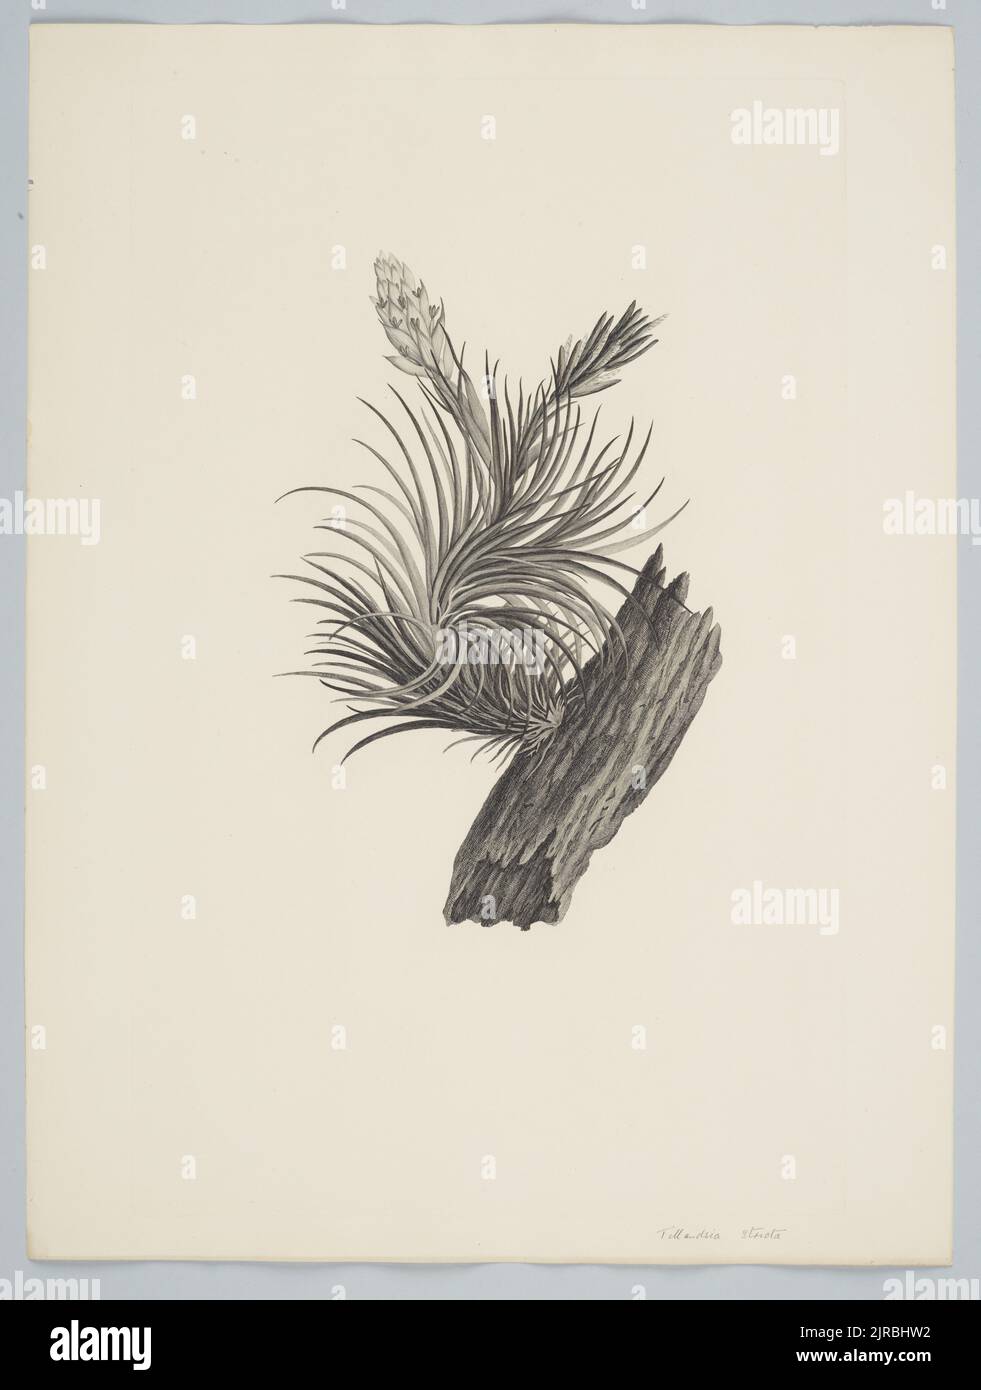 Tillandsia sticta Solander ex Sims, by Sydney Parkinson. Gift of the British Museum, 1895. Stock Photo